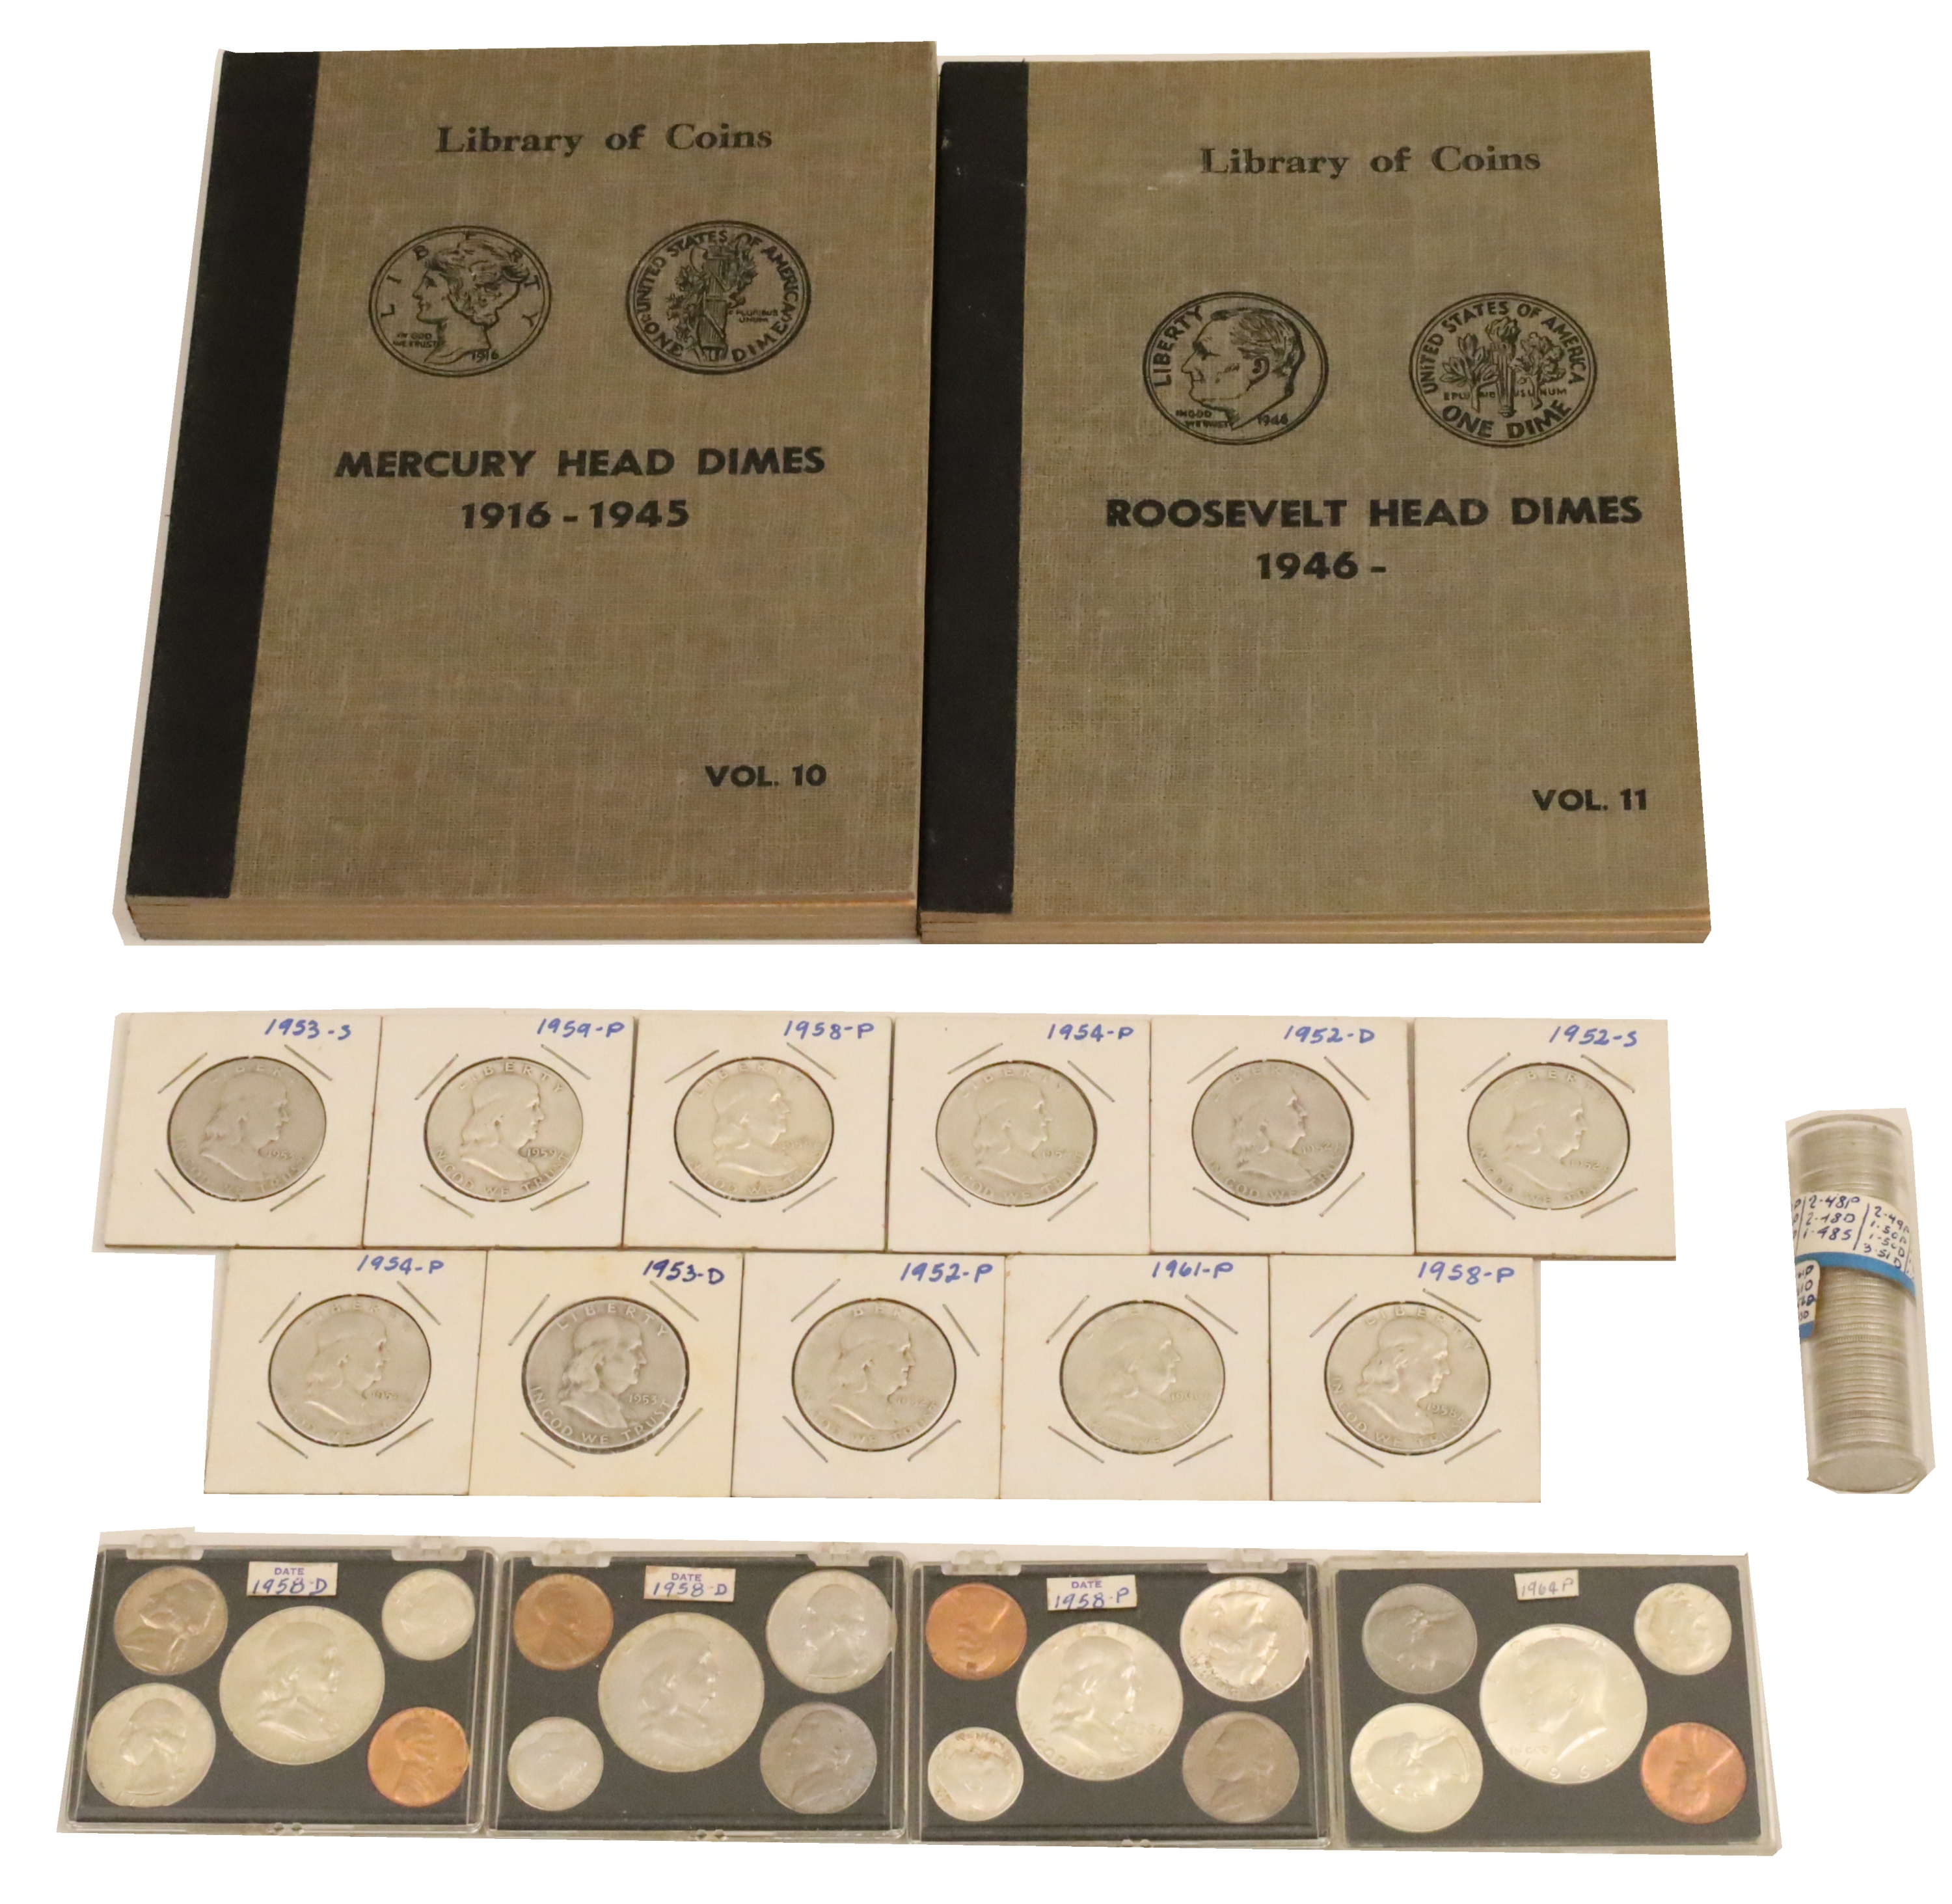 2 BOOKS TITLED "LIBRARY OF COINS"